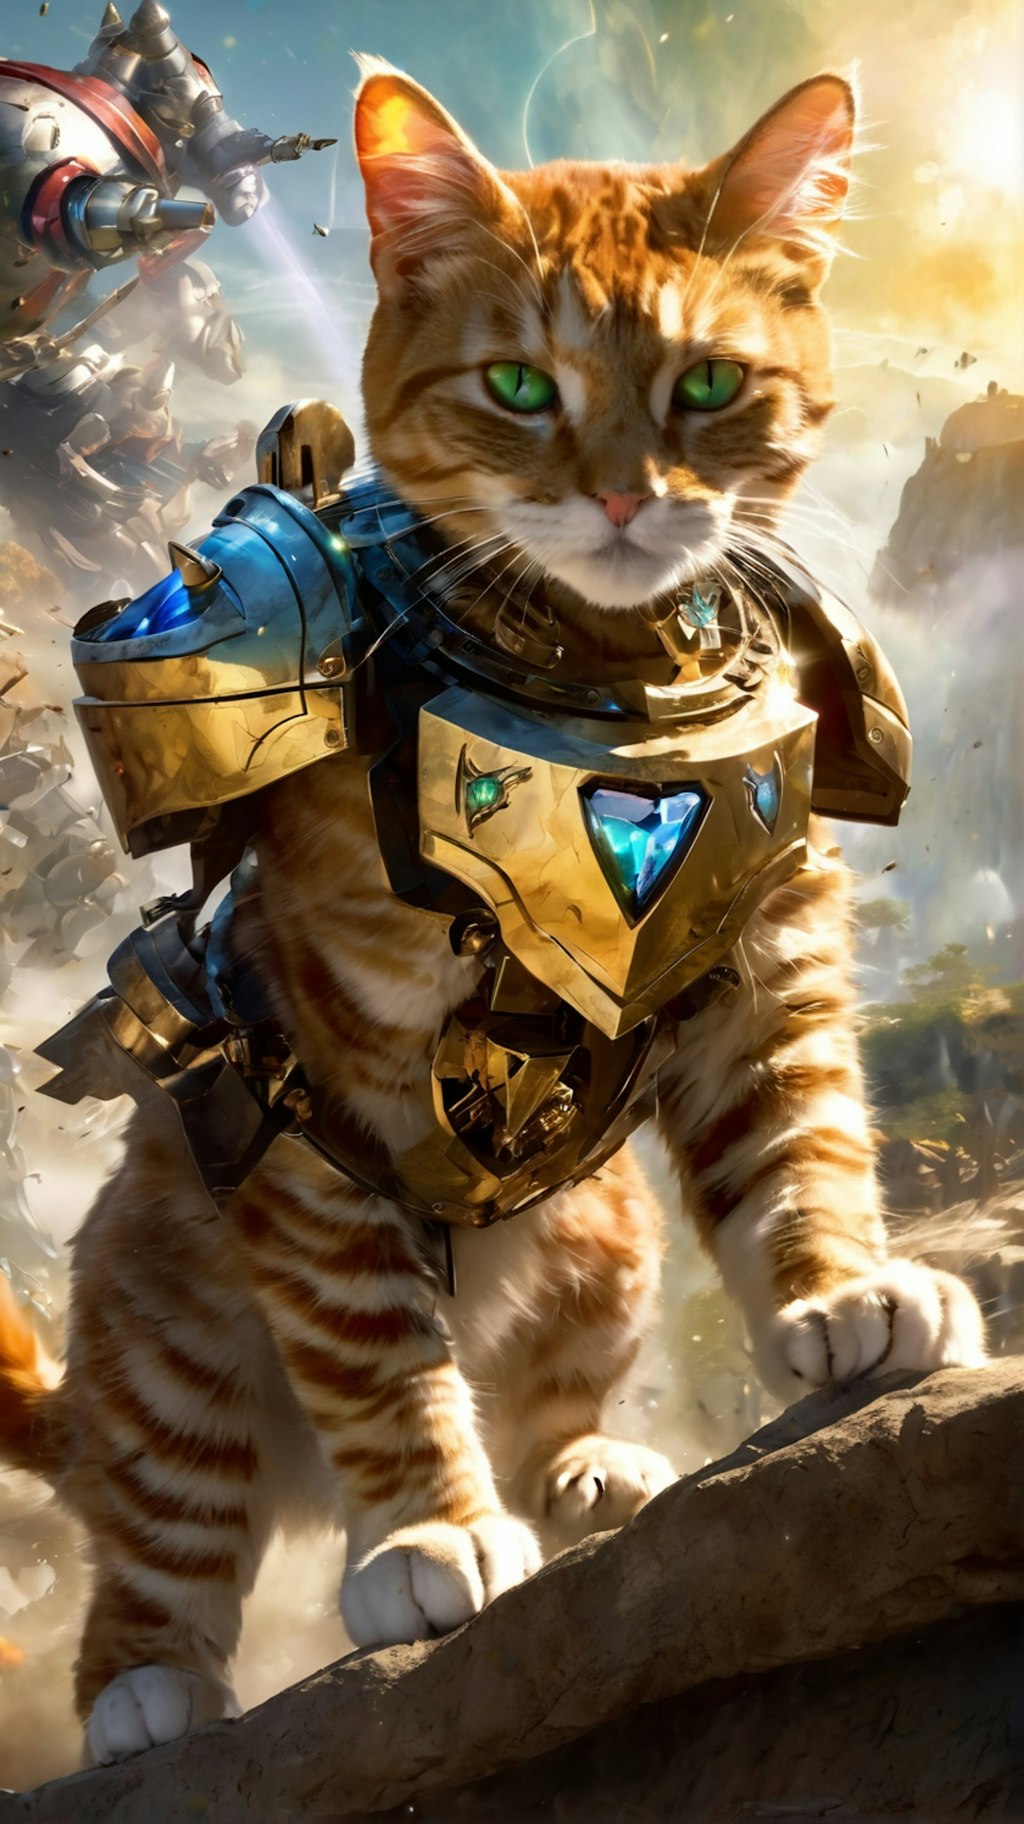 Mech Realms and the Swordsmen Cats of Steel